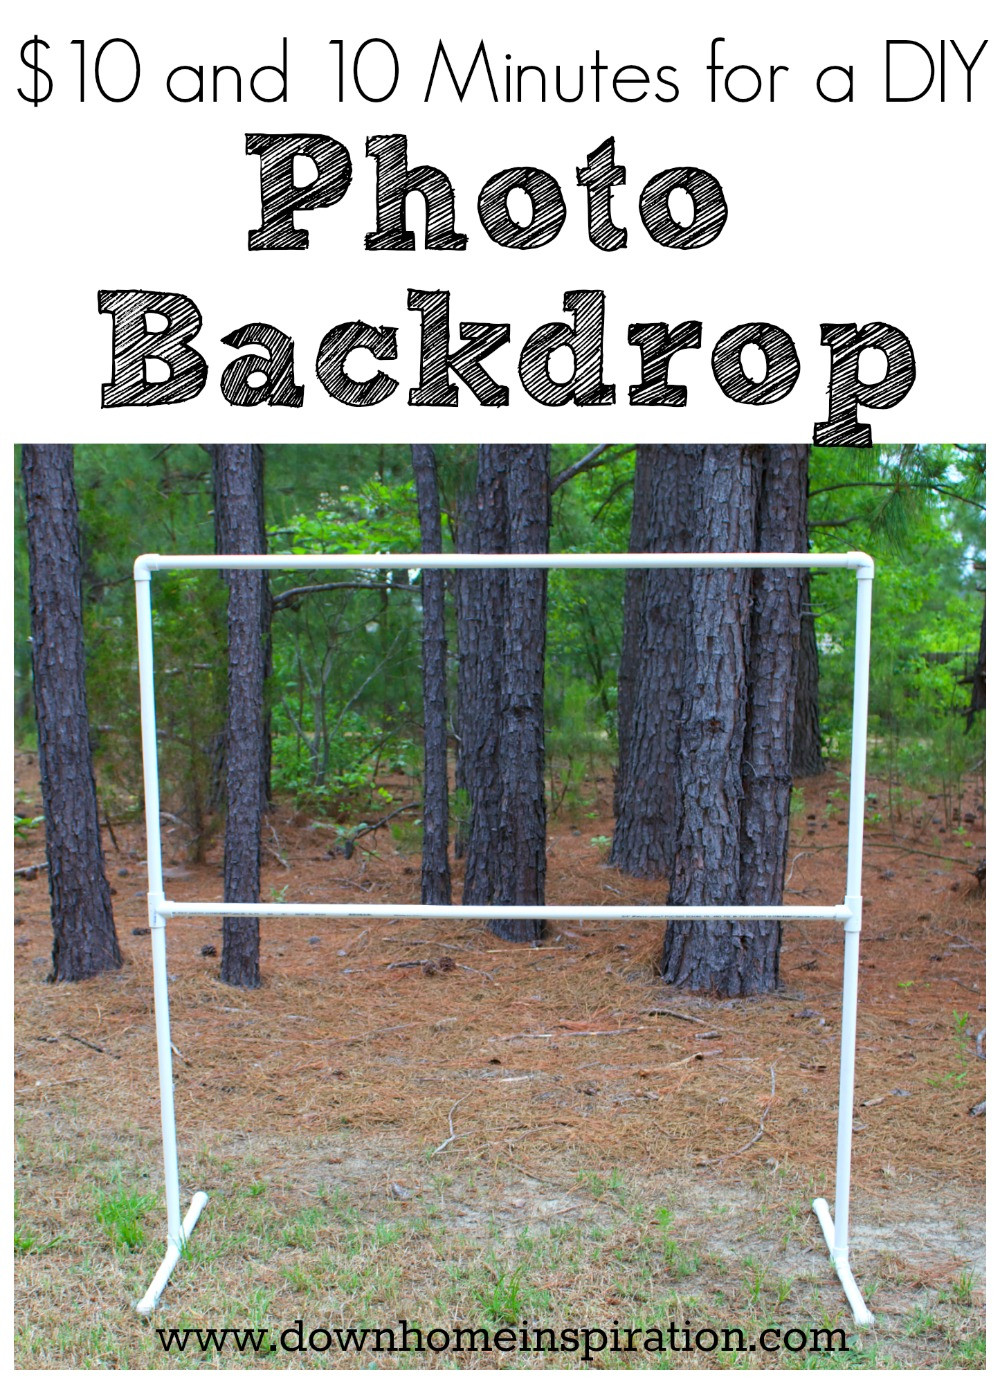 DIY Wedding Backdrop Stand
 $10 and 10 Minutes for a DIY Backdrop Down Home